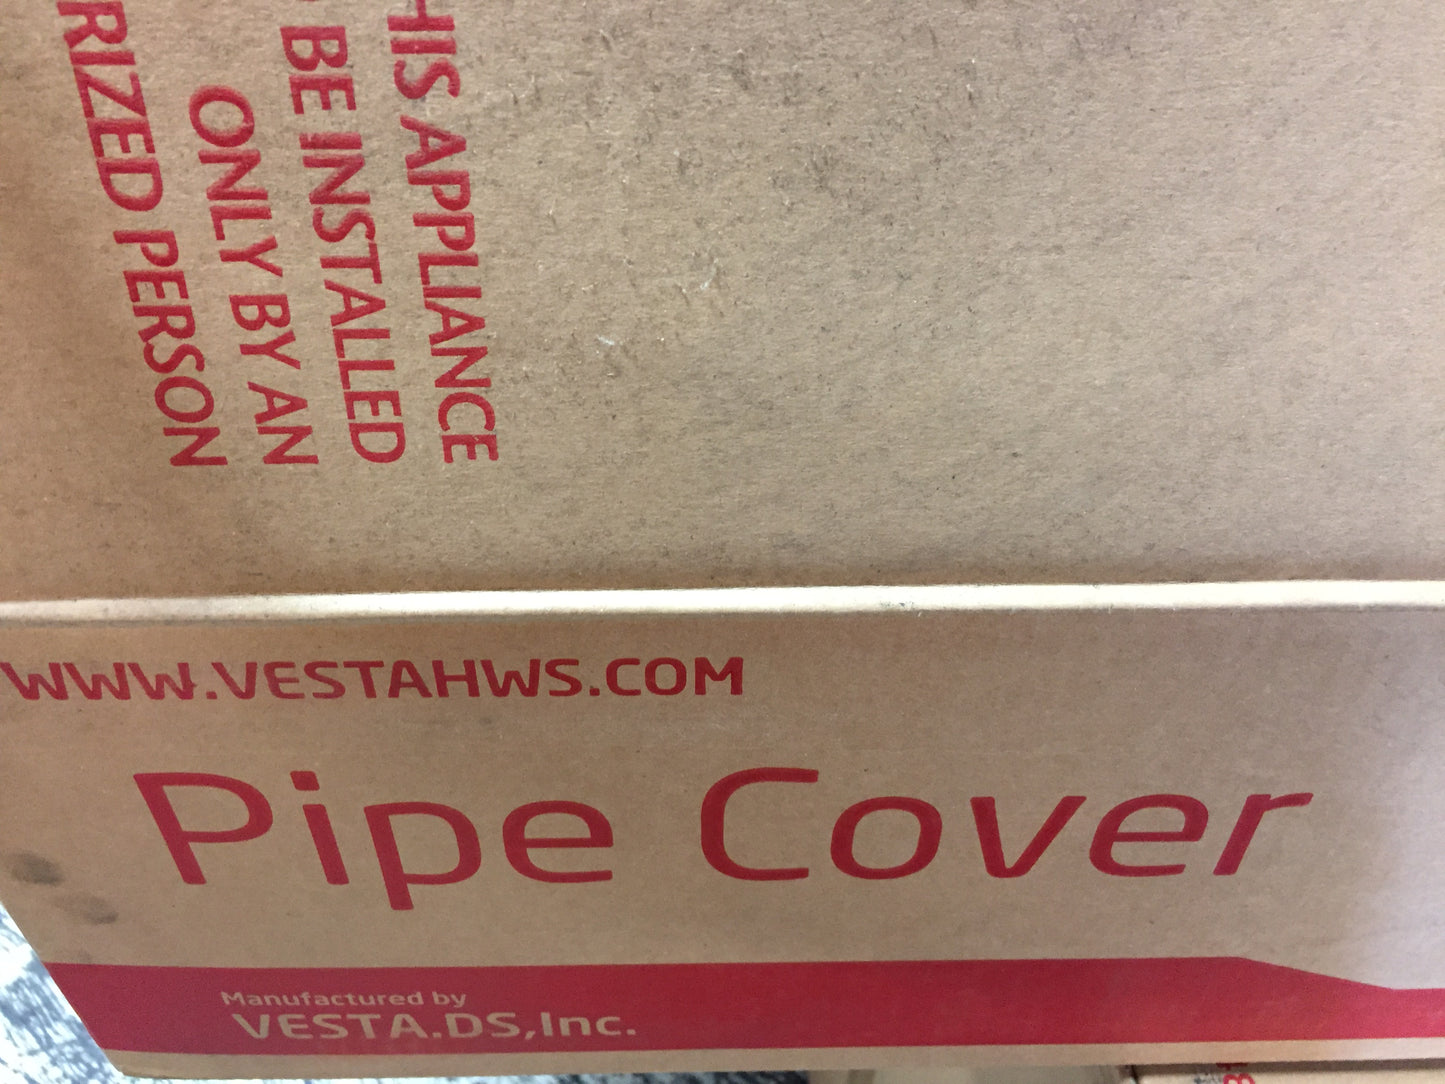 PIPE COVER KIT FOR VESTA TANKLESS HOT WATER SYSTEMS 